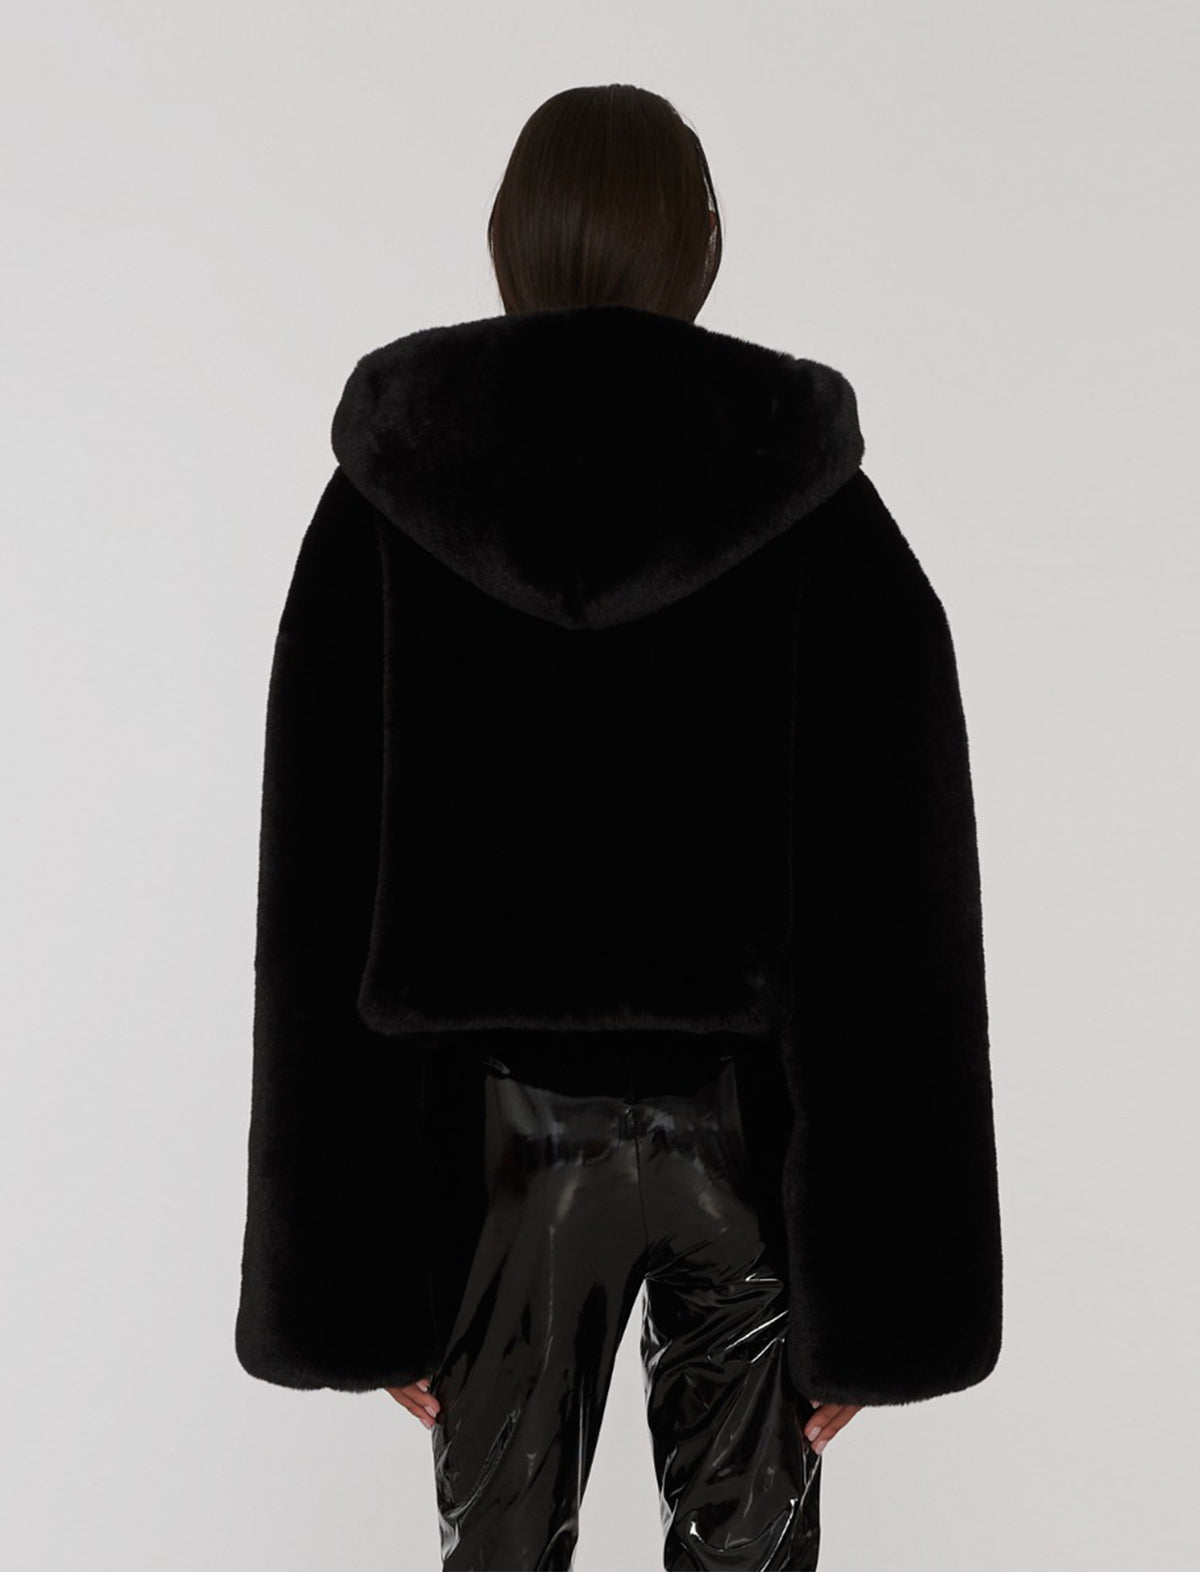 ROTATE Holiday Fluffy Faux Fur Hooded Jacket in Black